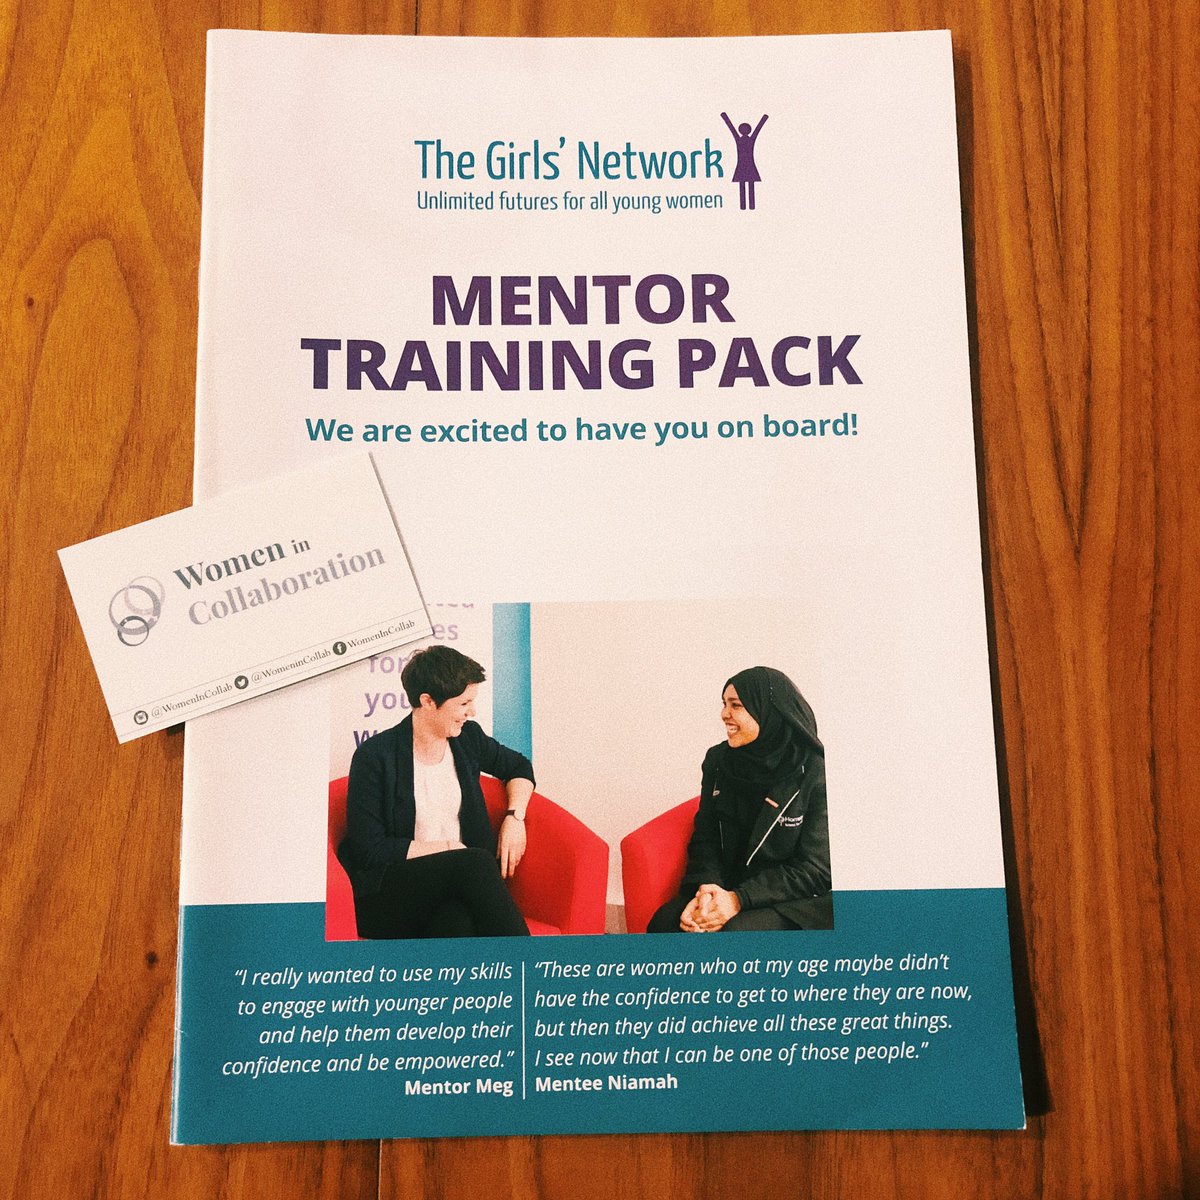 Last night our founder @elliereess spent the evening @gatesheadcoll preparing for journey in becoming a mentor to a young girl in the North East with @TheGirlsNet  #TheGirlsNetwork #MentoringProgram